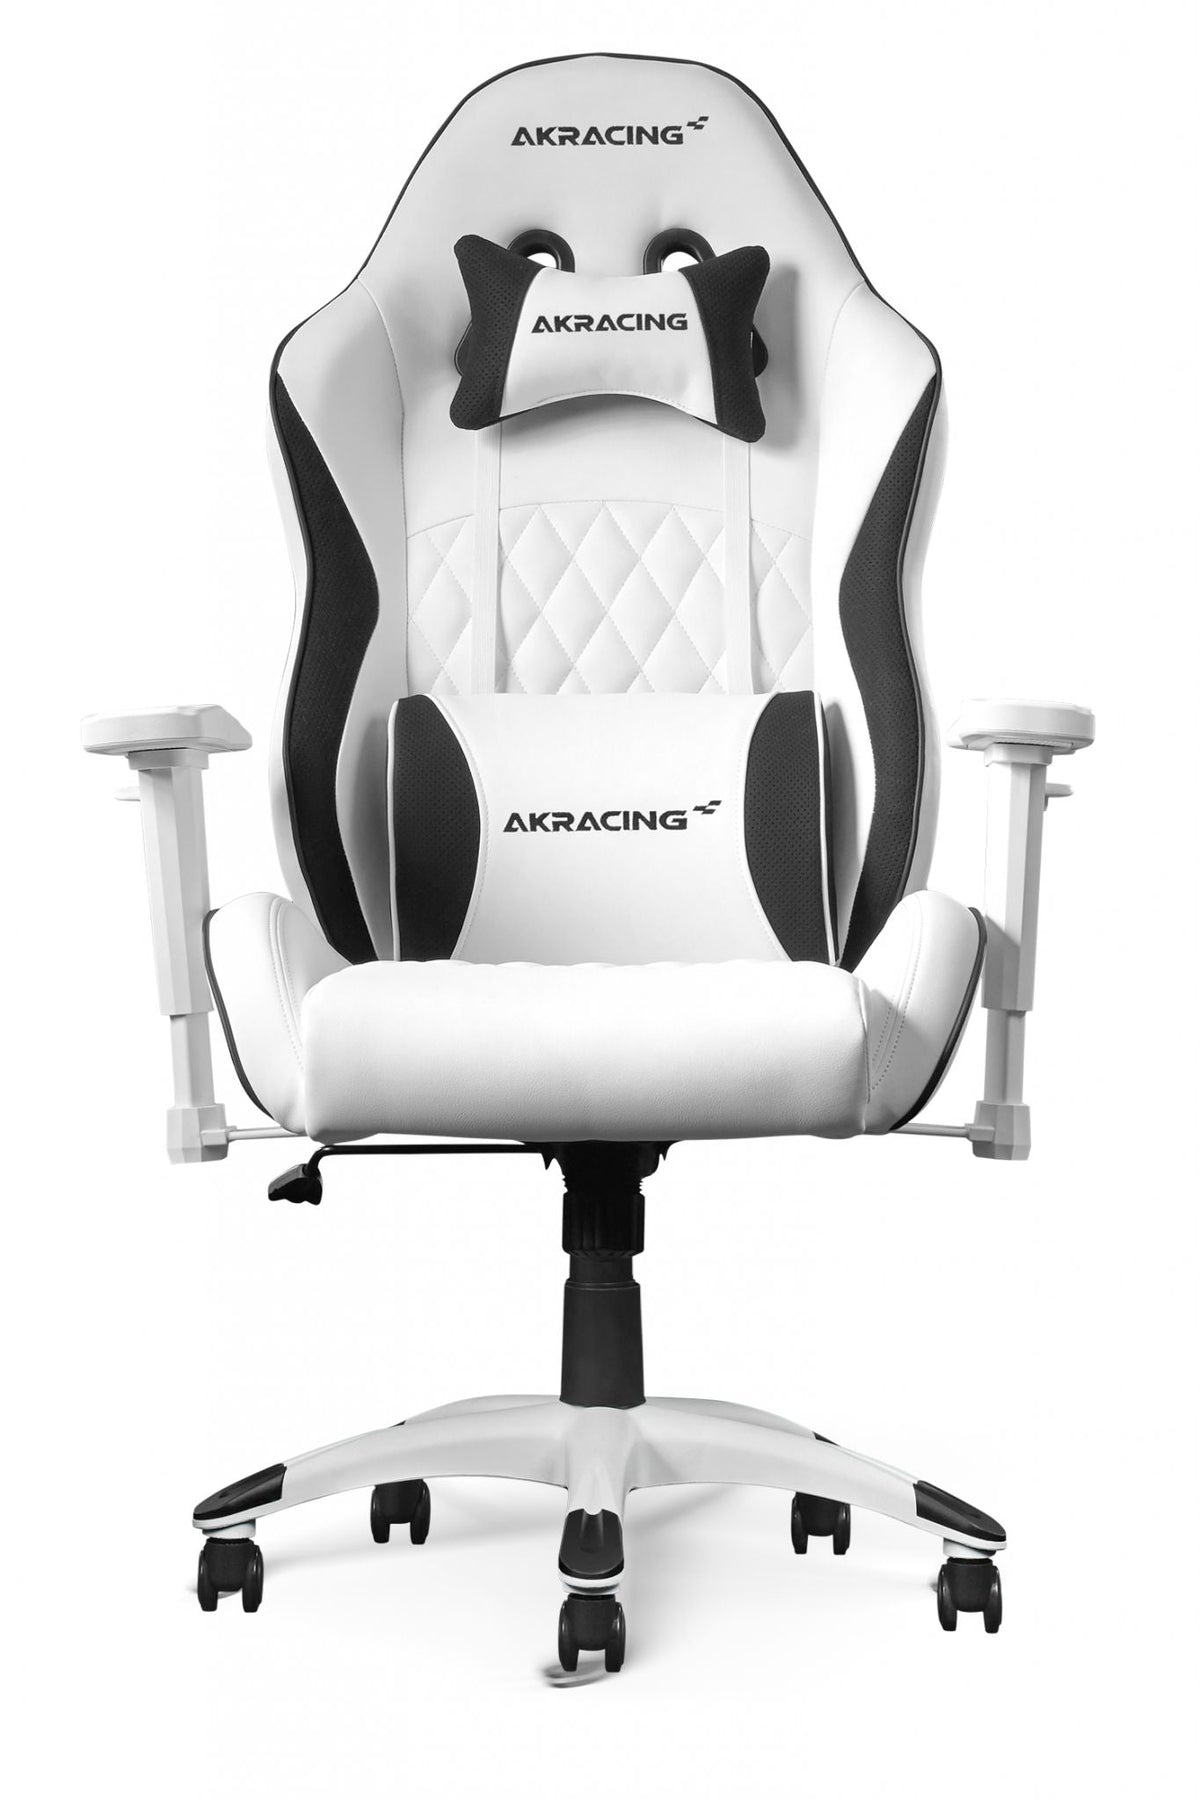 AKRacing California PC gaming chair Upholstered padded seat Black, White